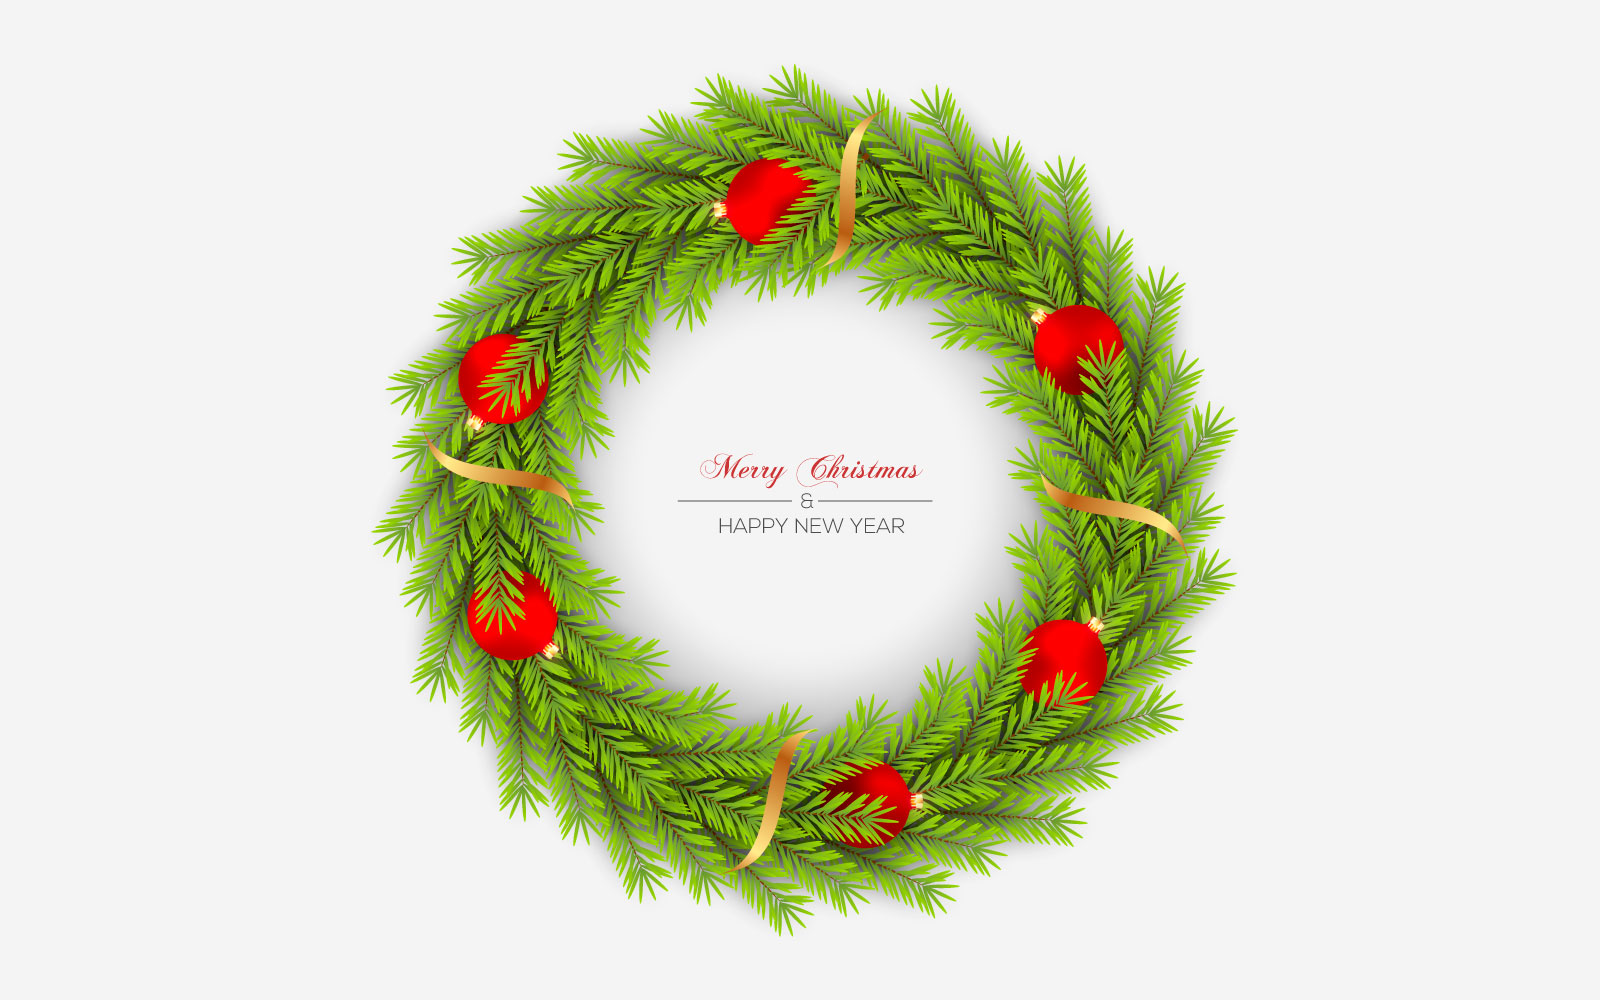 Christmas wreath vector design merry christmas text garland element for xmas greeting card design